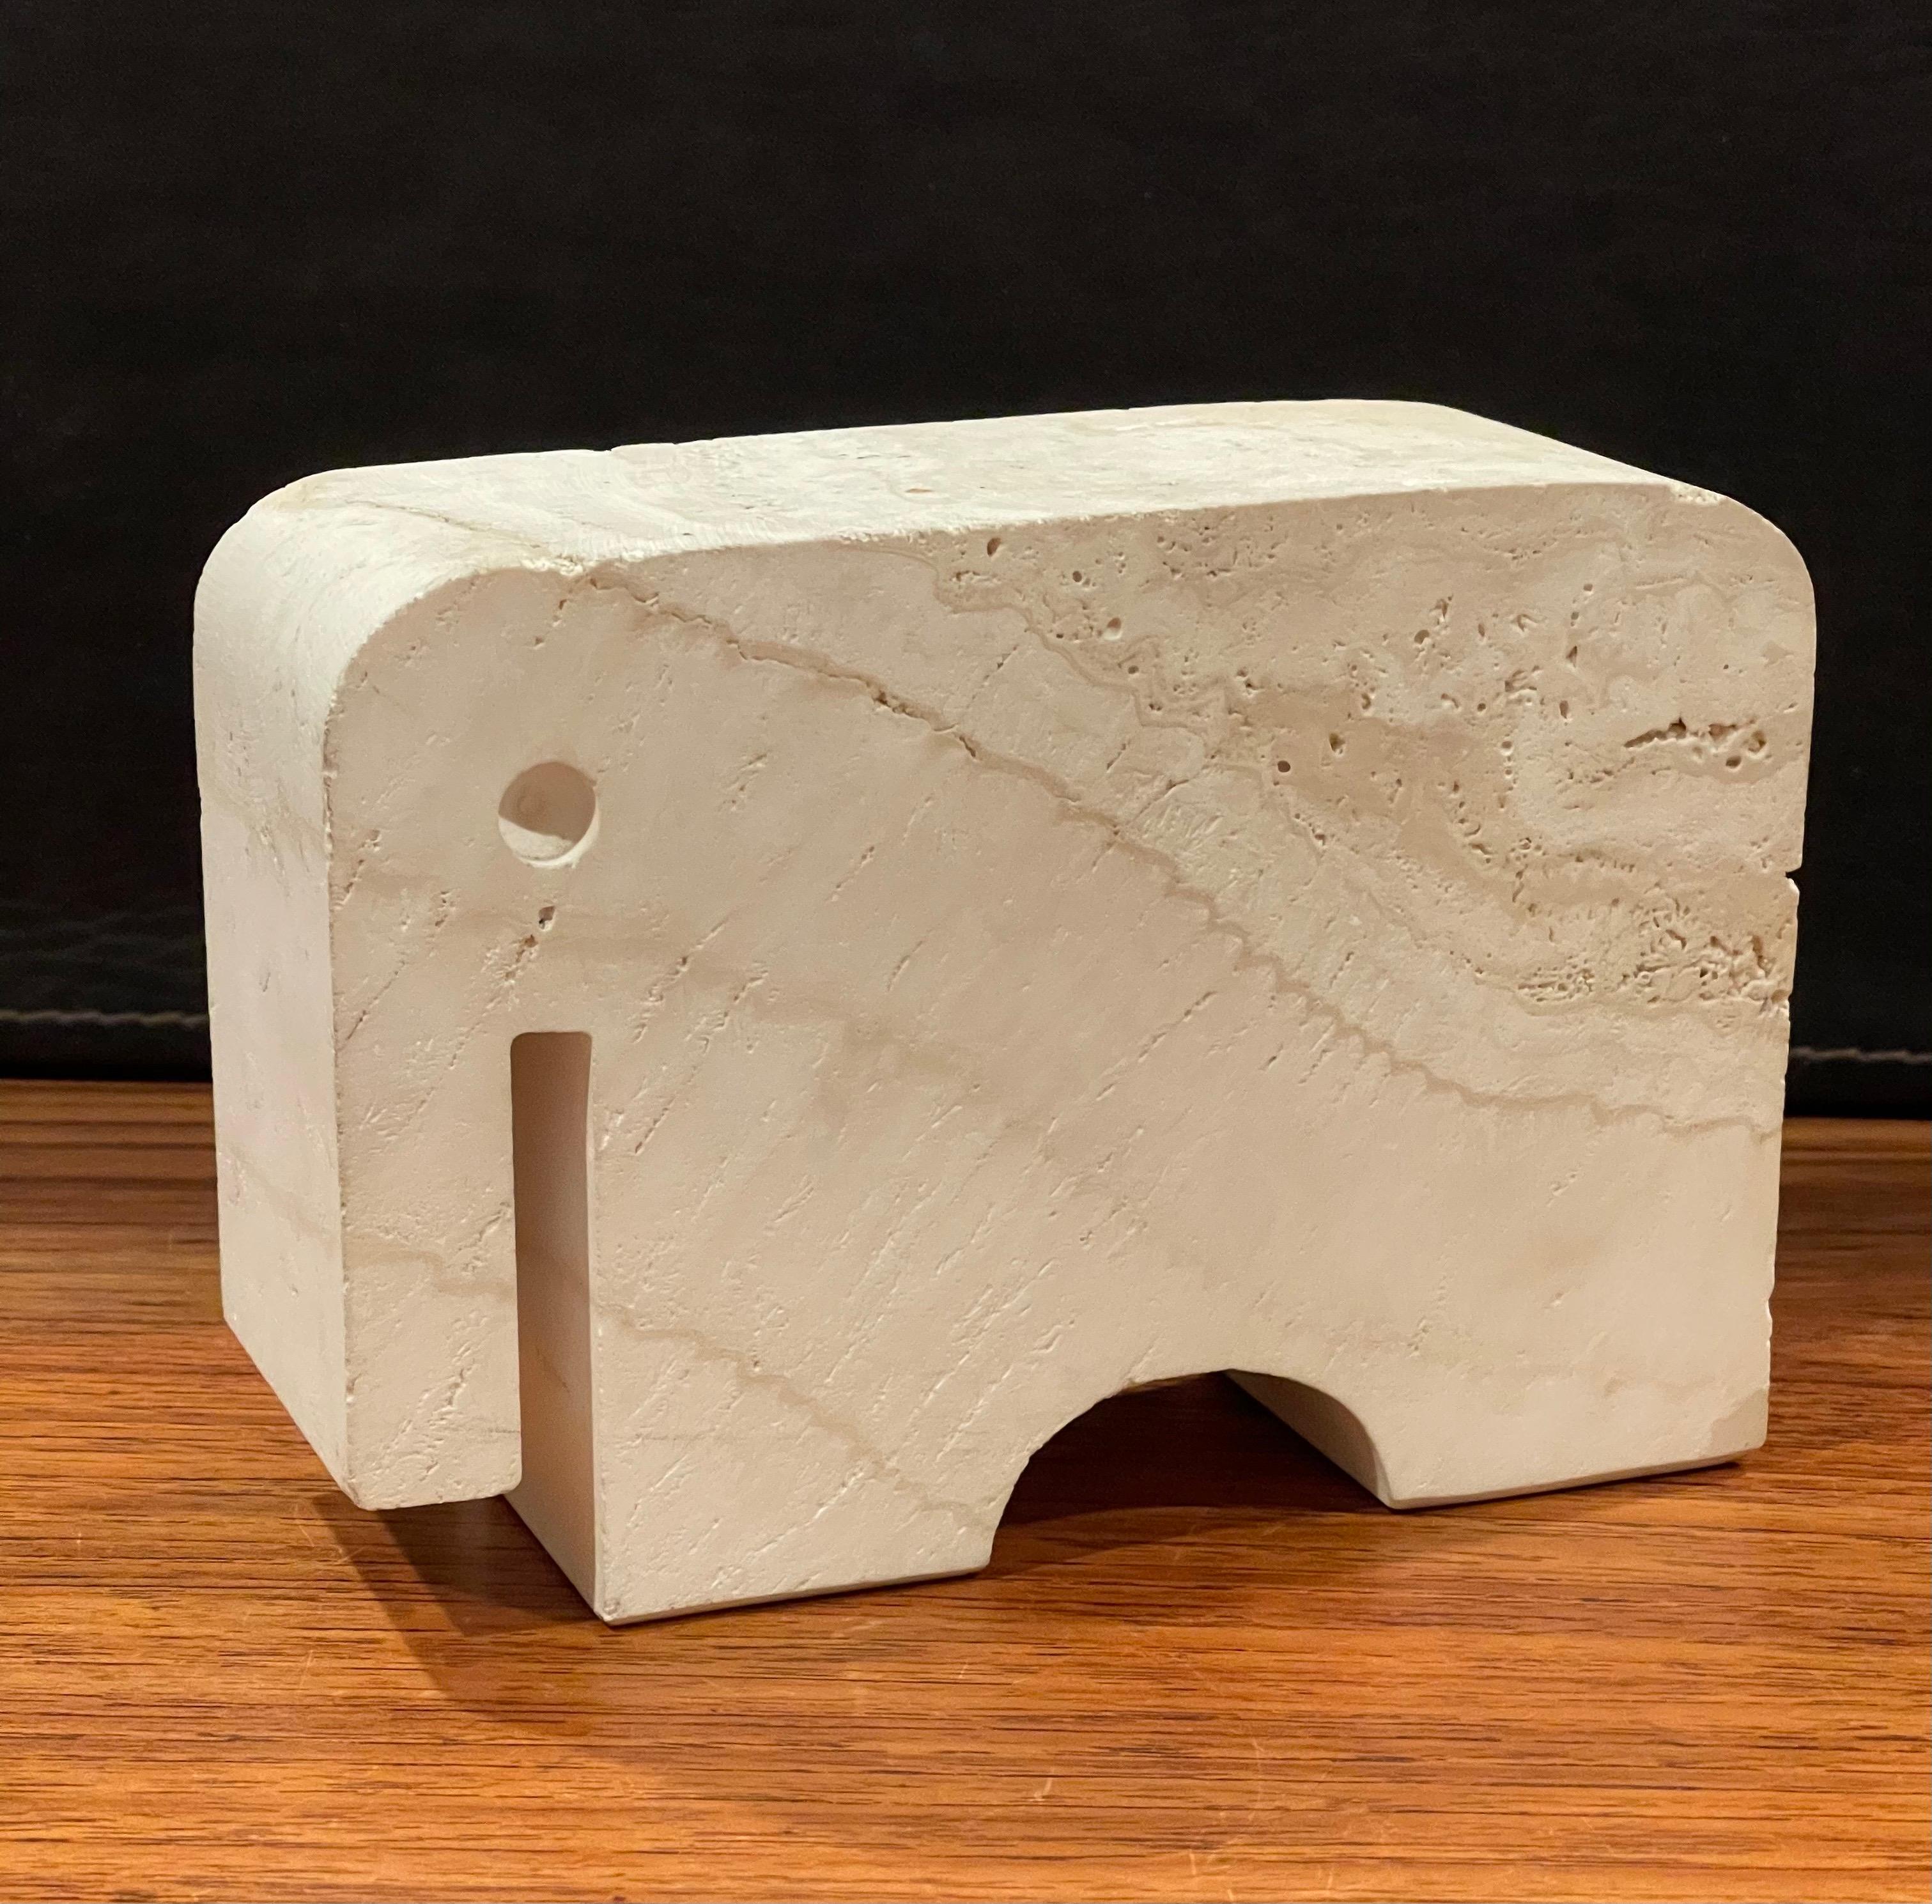 A very cool Mid-Century Modern Italian travertine elephant sculpture or bookend by Fratelli Mannelli of Signa, Italy, circa 1970s. The piece is in very good vintage condition with no chips or cracks and measures 6.75